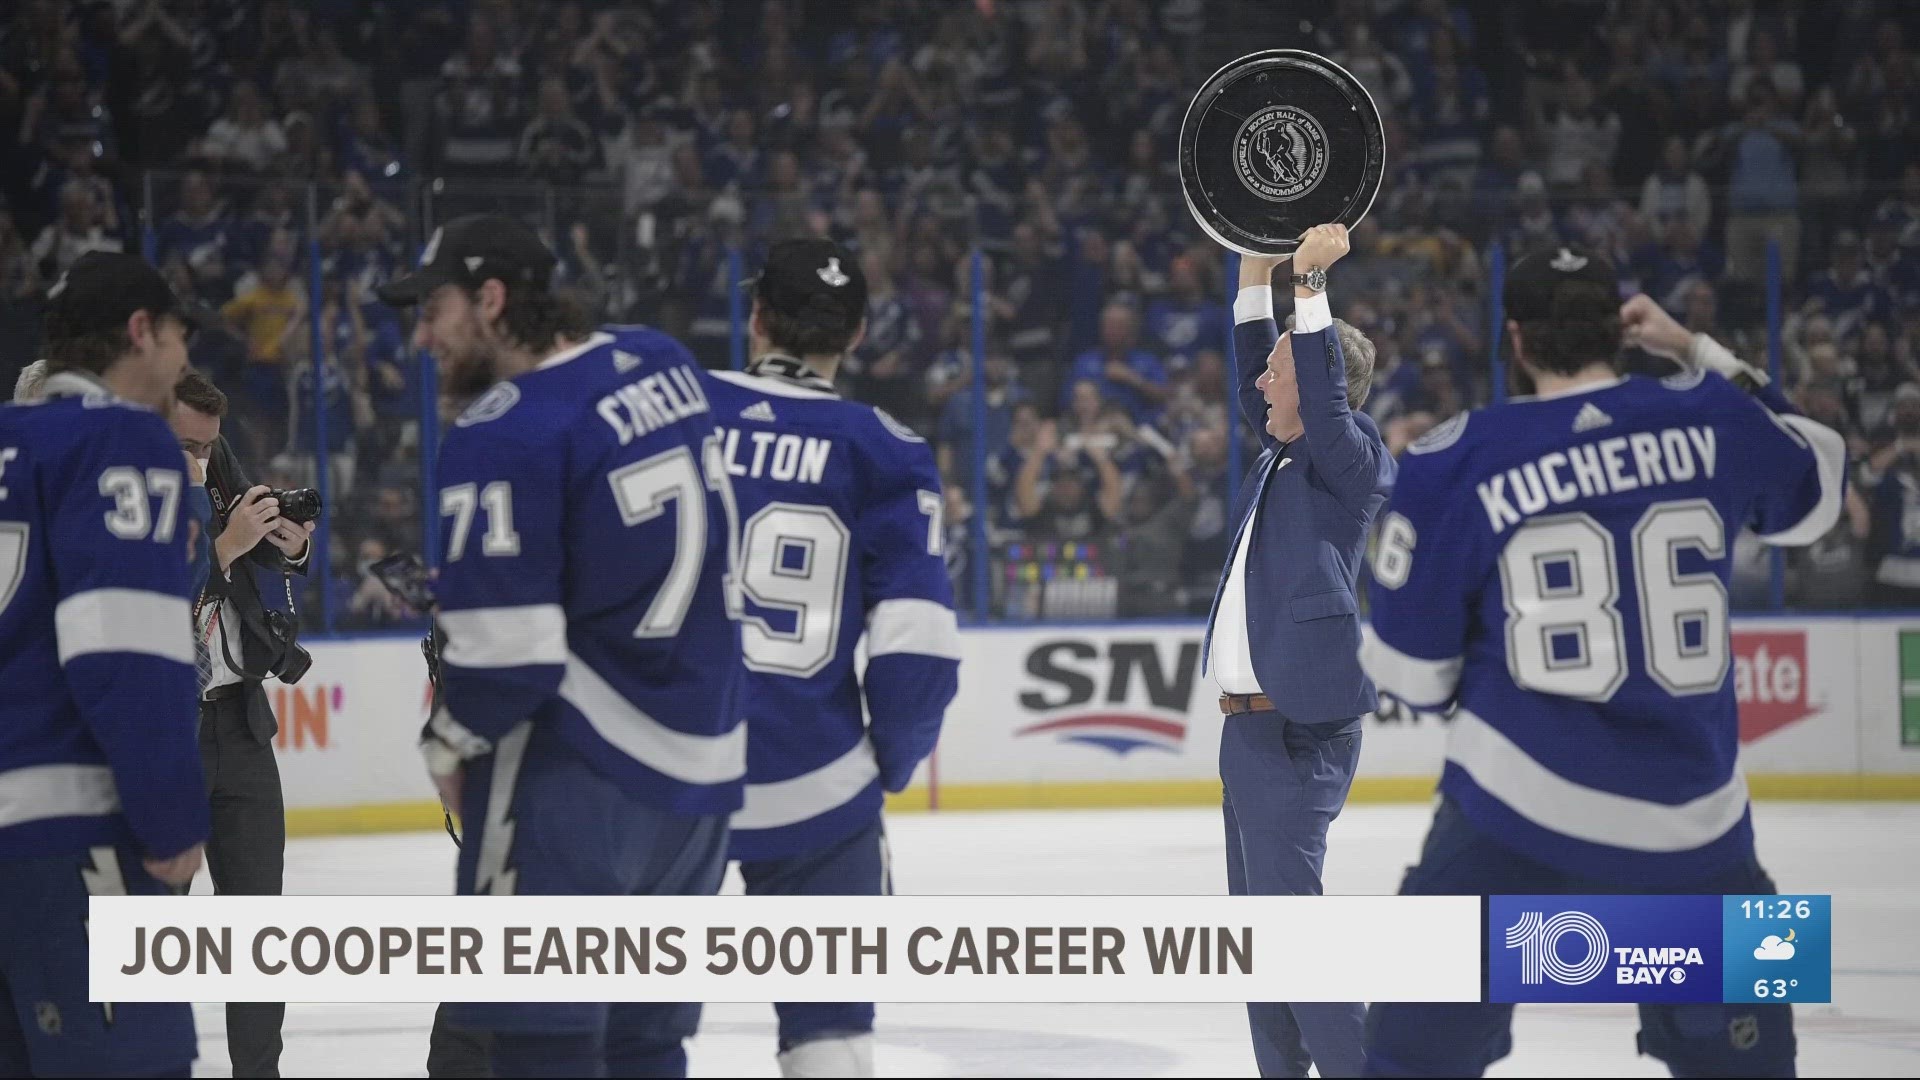 Jon Cooper became the third-fastest NHL coach to win 500 games.